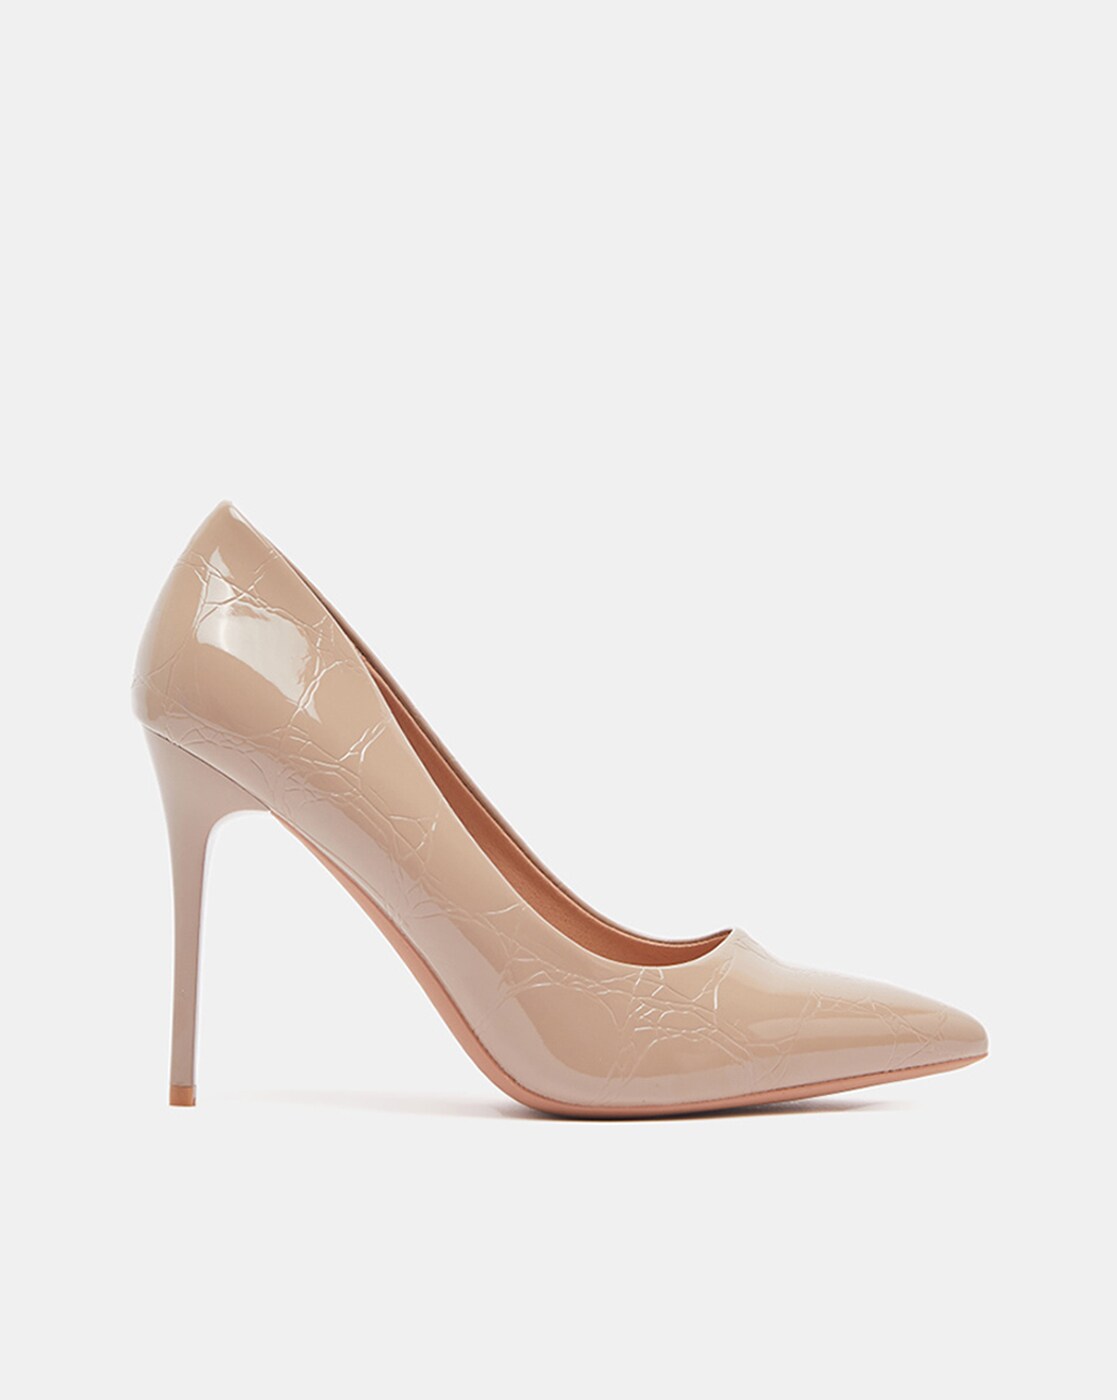 Nude Patent Pointed-Toe Stiletto Heels - CHARLES & KEITH IN